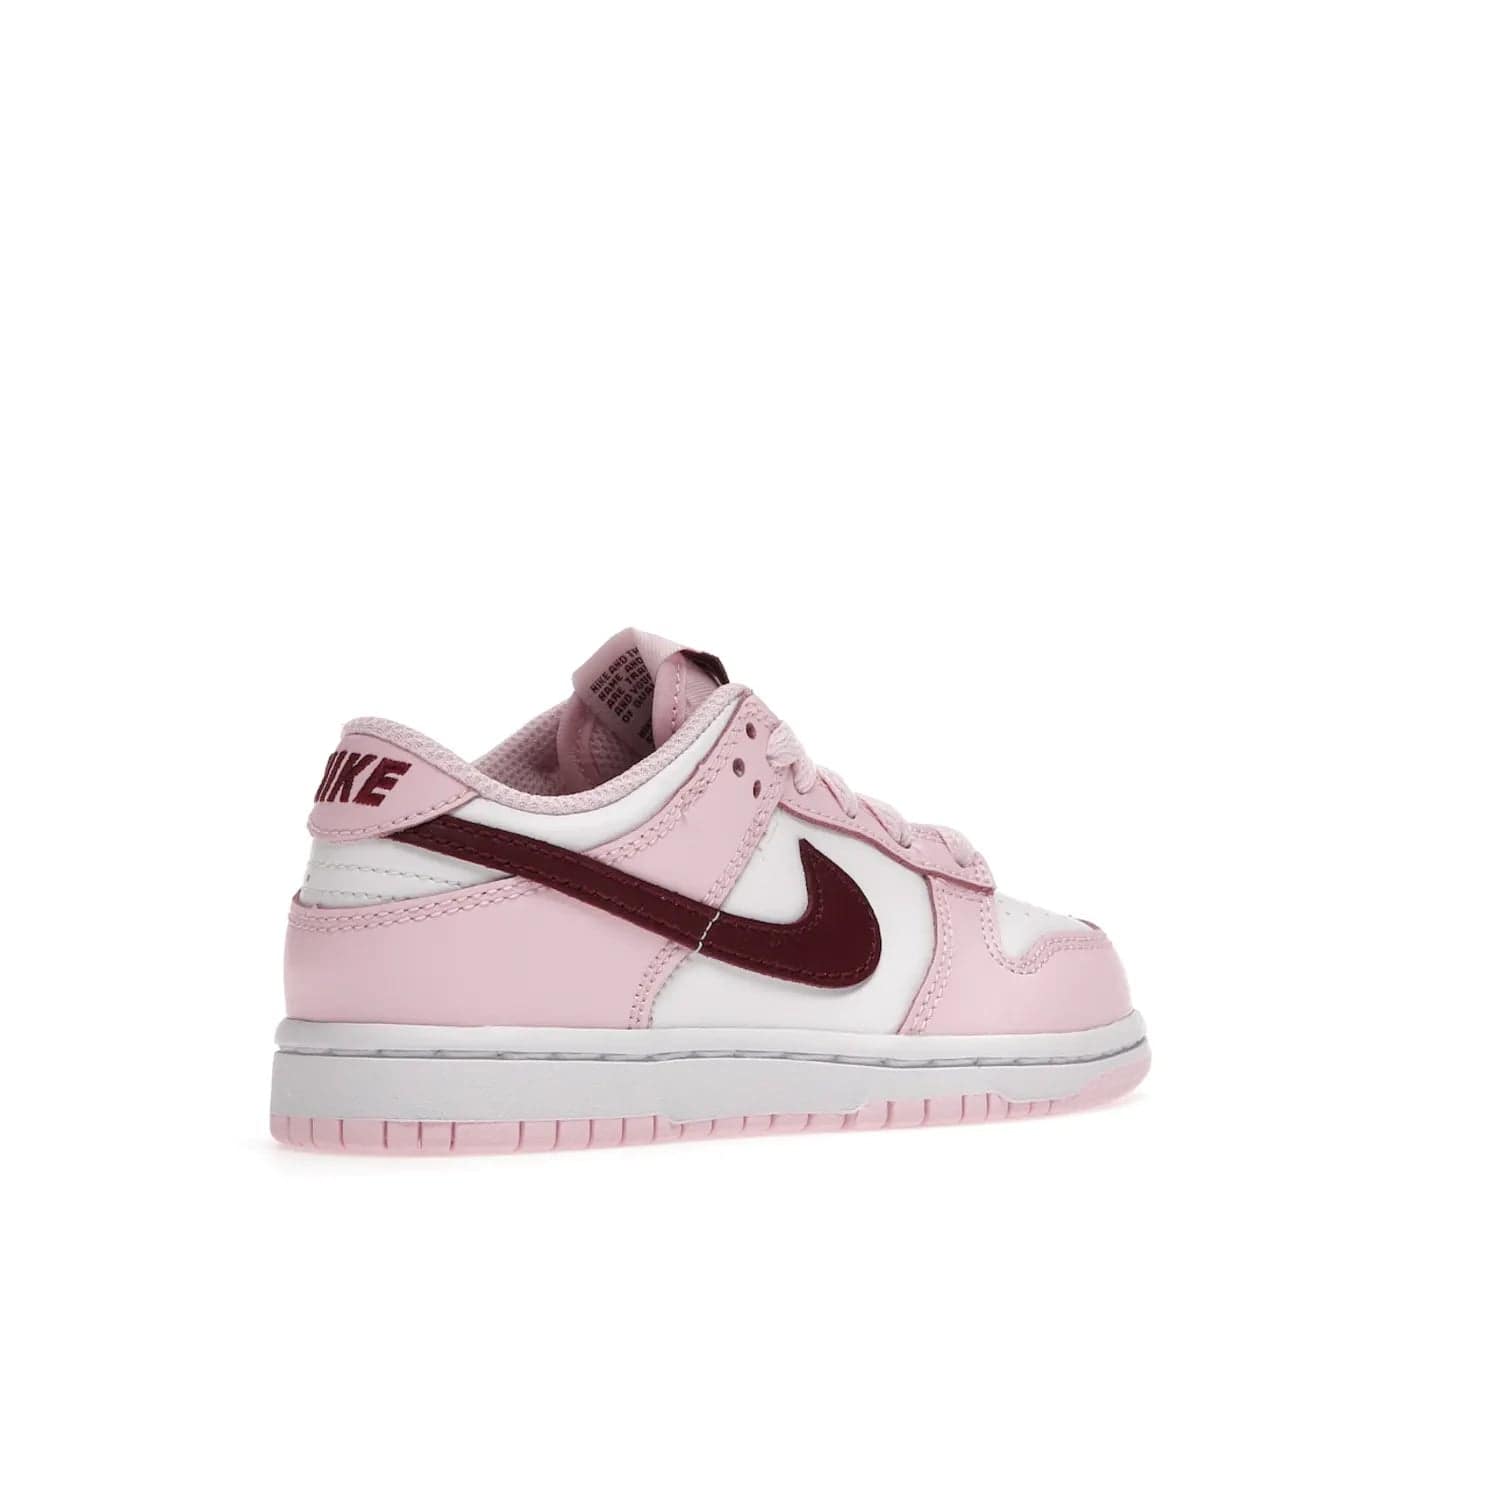 Nike Dunk Low Pink Red White (PS) - Image 33 - Only at www.BallersClubKickz.com - Introducing the Nike Dunk Low Pink Red White (PS), the perfect addition to your sneaker collection. A classic silhouette with modern vibrant colors, including a pink upper with red and white accents and a white midsole. Comfort and durability, perfect for any outfit. Limited edition, available June 22nd.